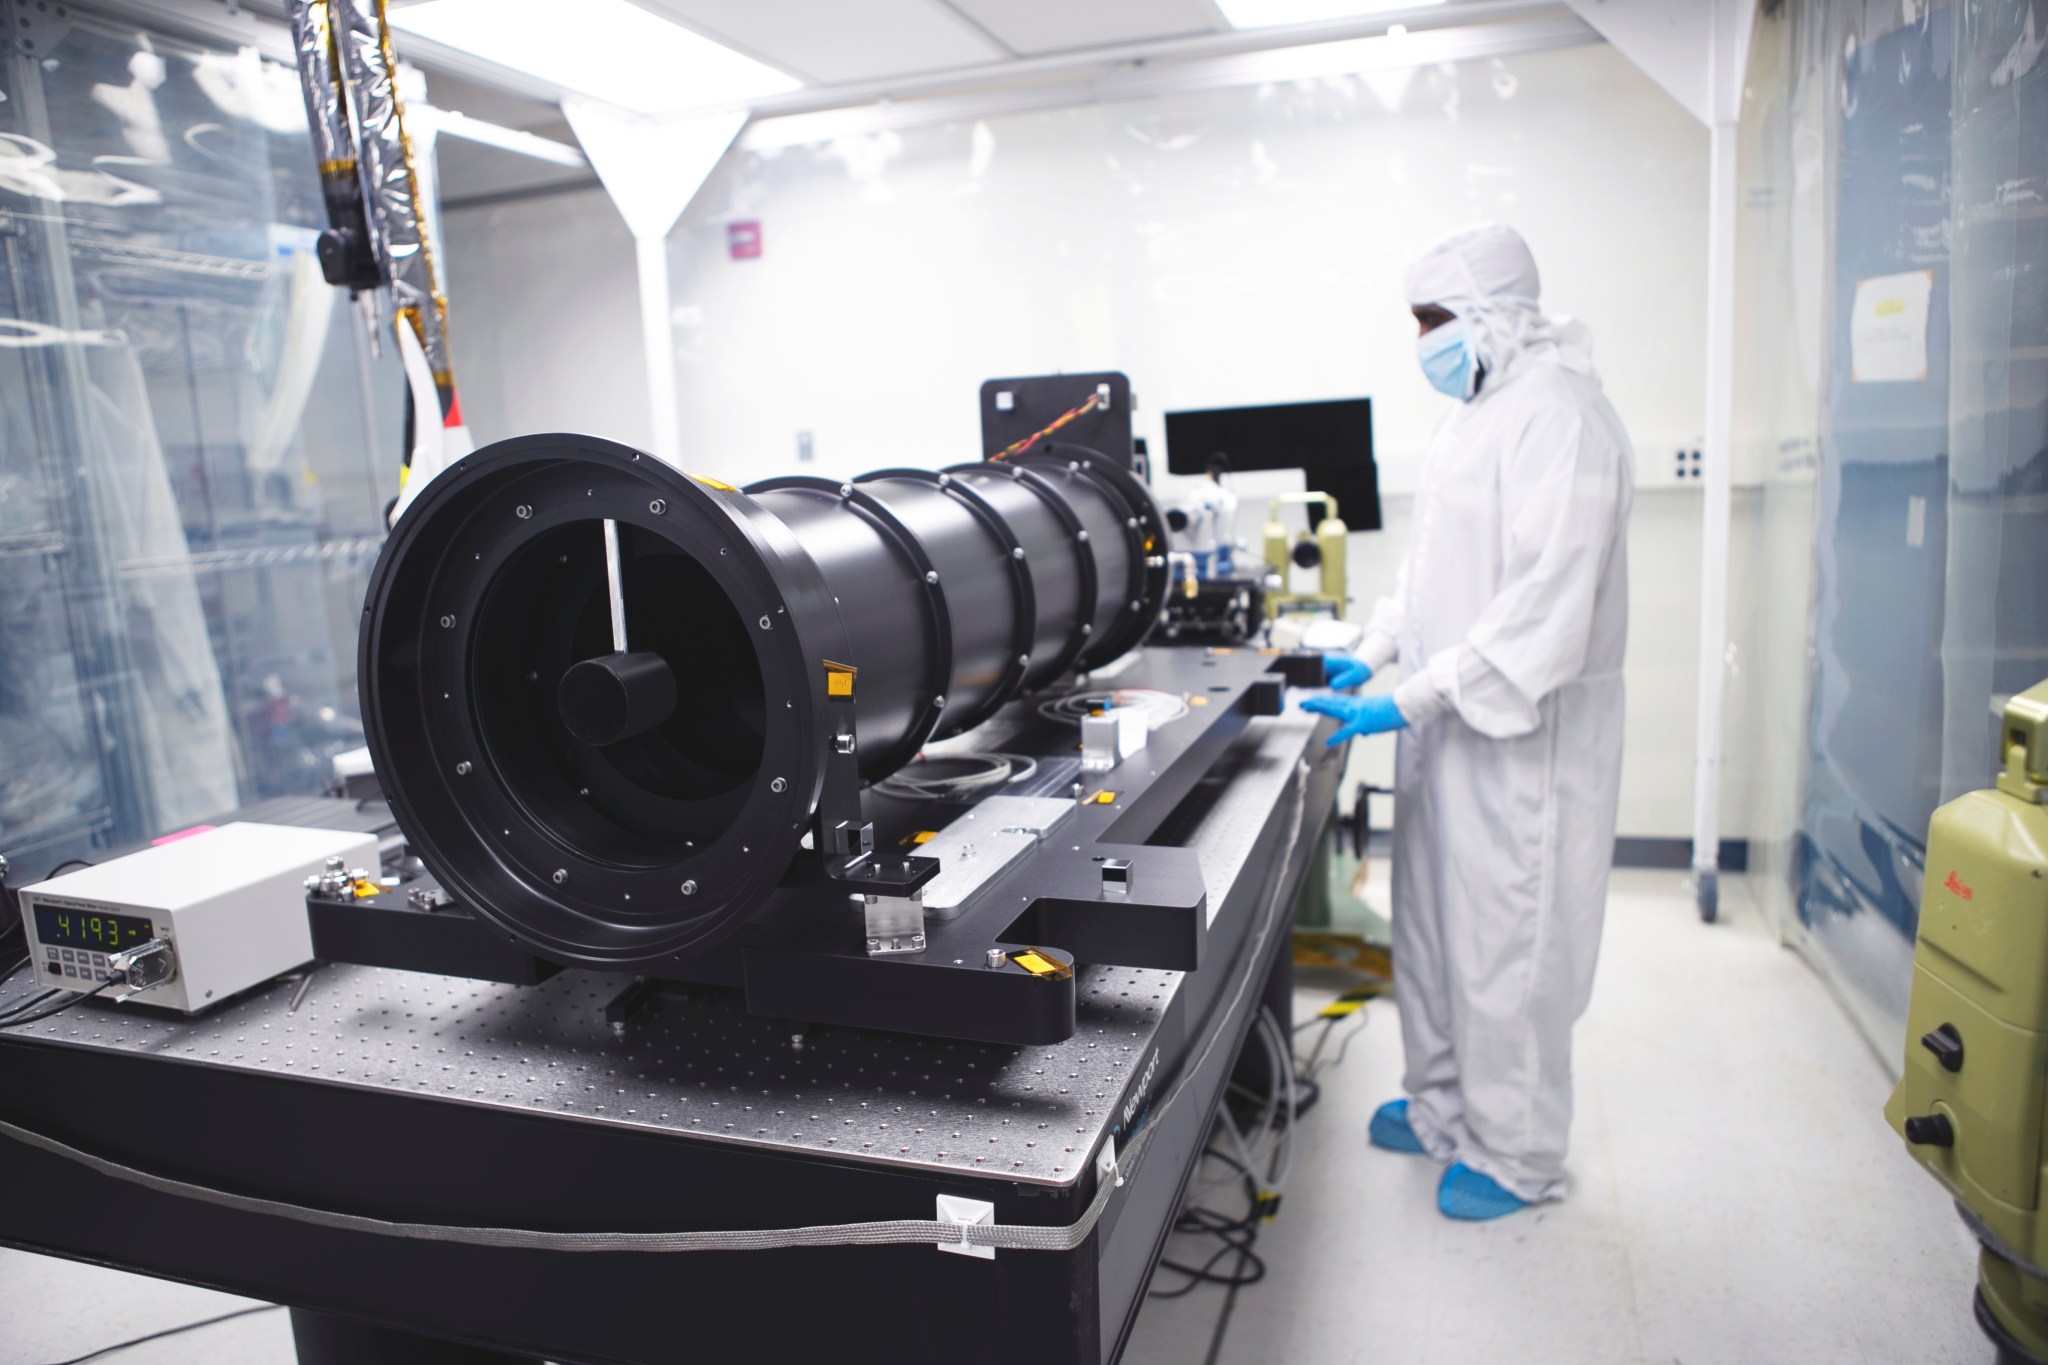 A person in a white suit stands next to a coronagraph instrument, which appears as a long, black tube, in clean room with white walls and floors.